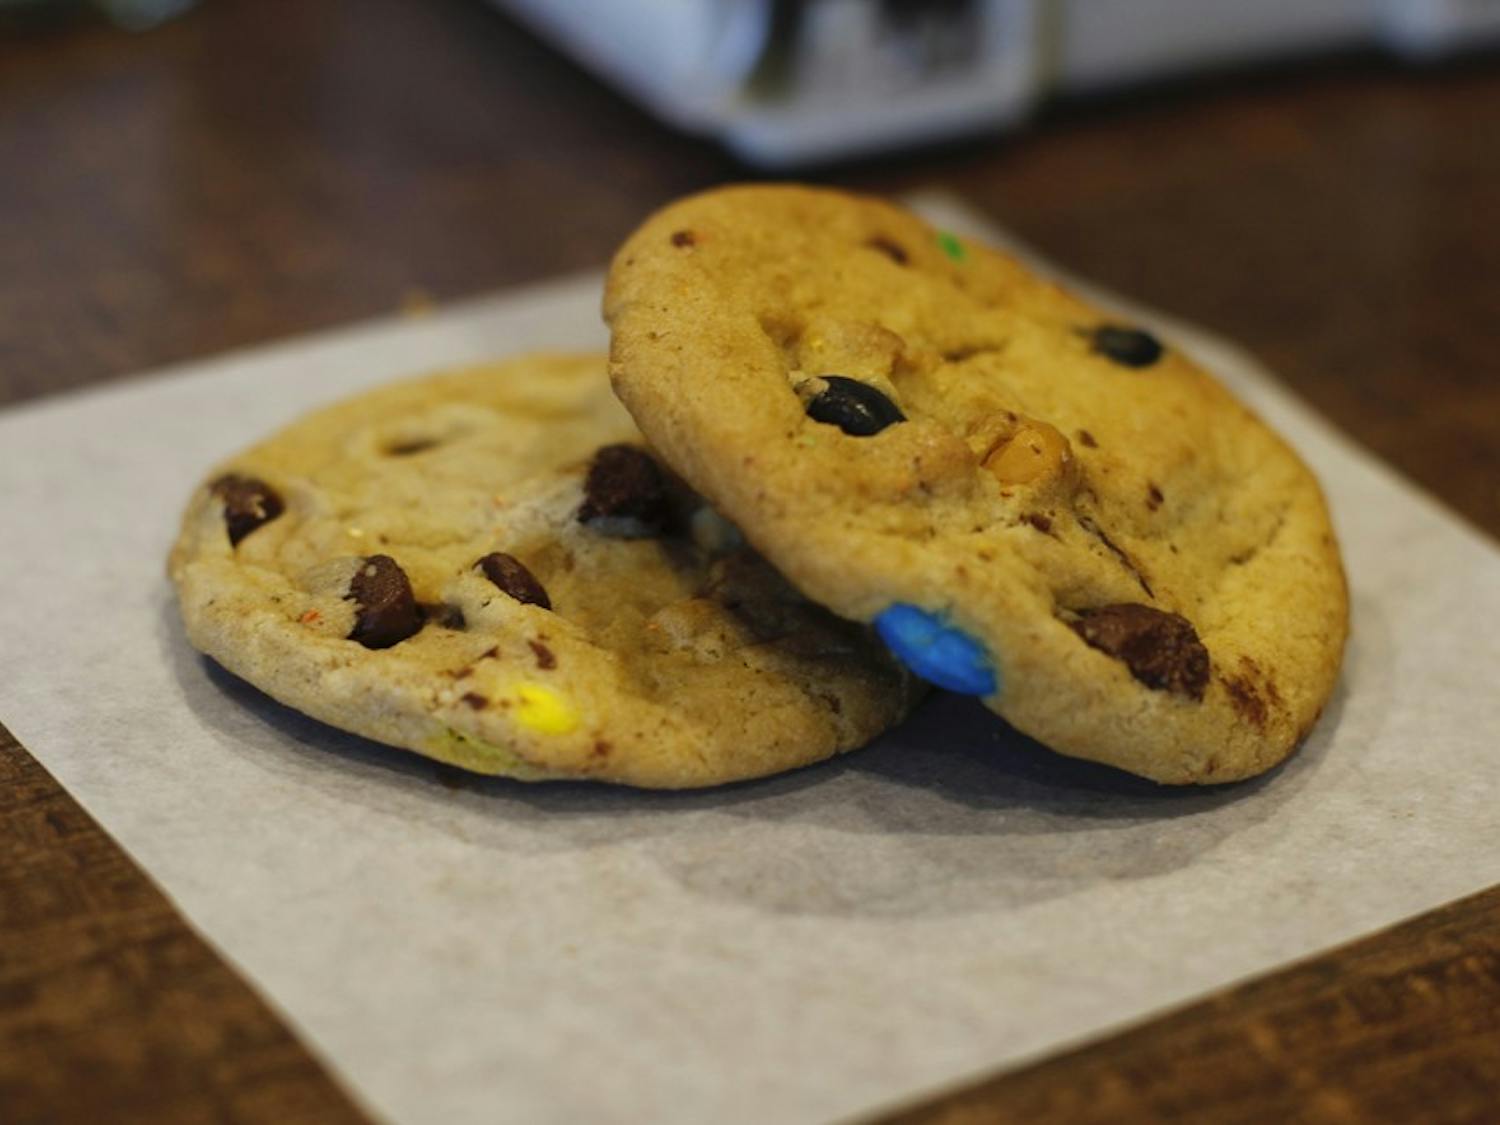 Carolina Dining Service has noticeably changed the recipe and altered the taste of the M&M cookies served in the dining halls on campus.